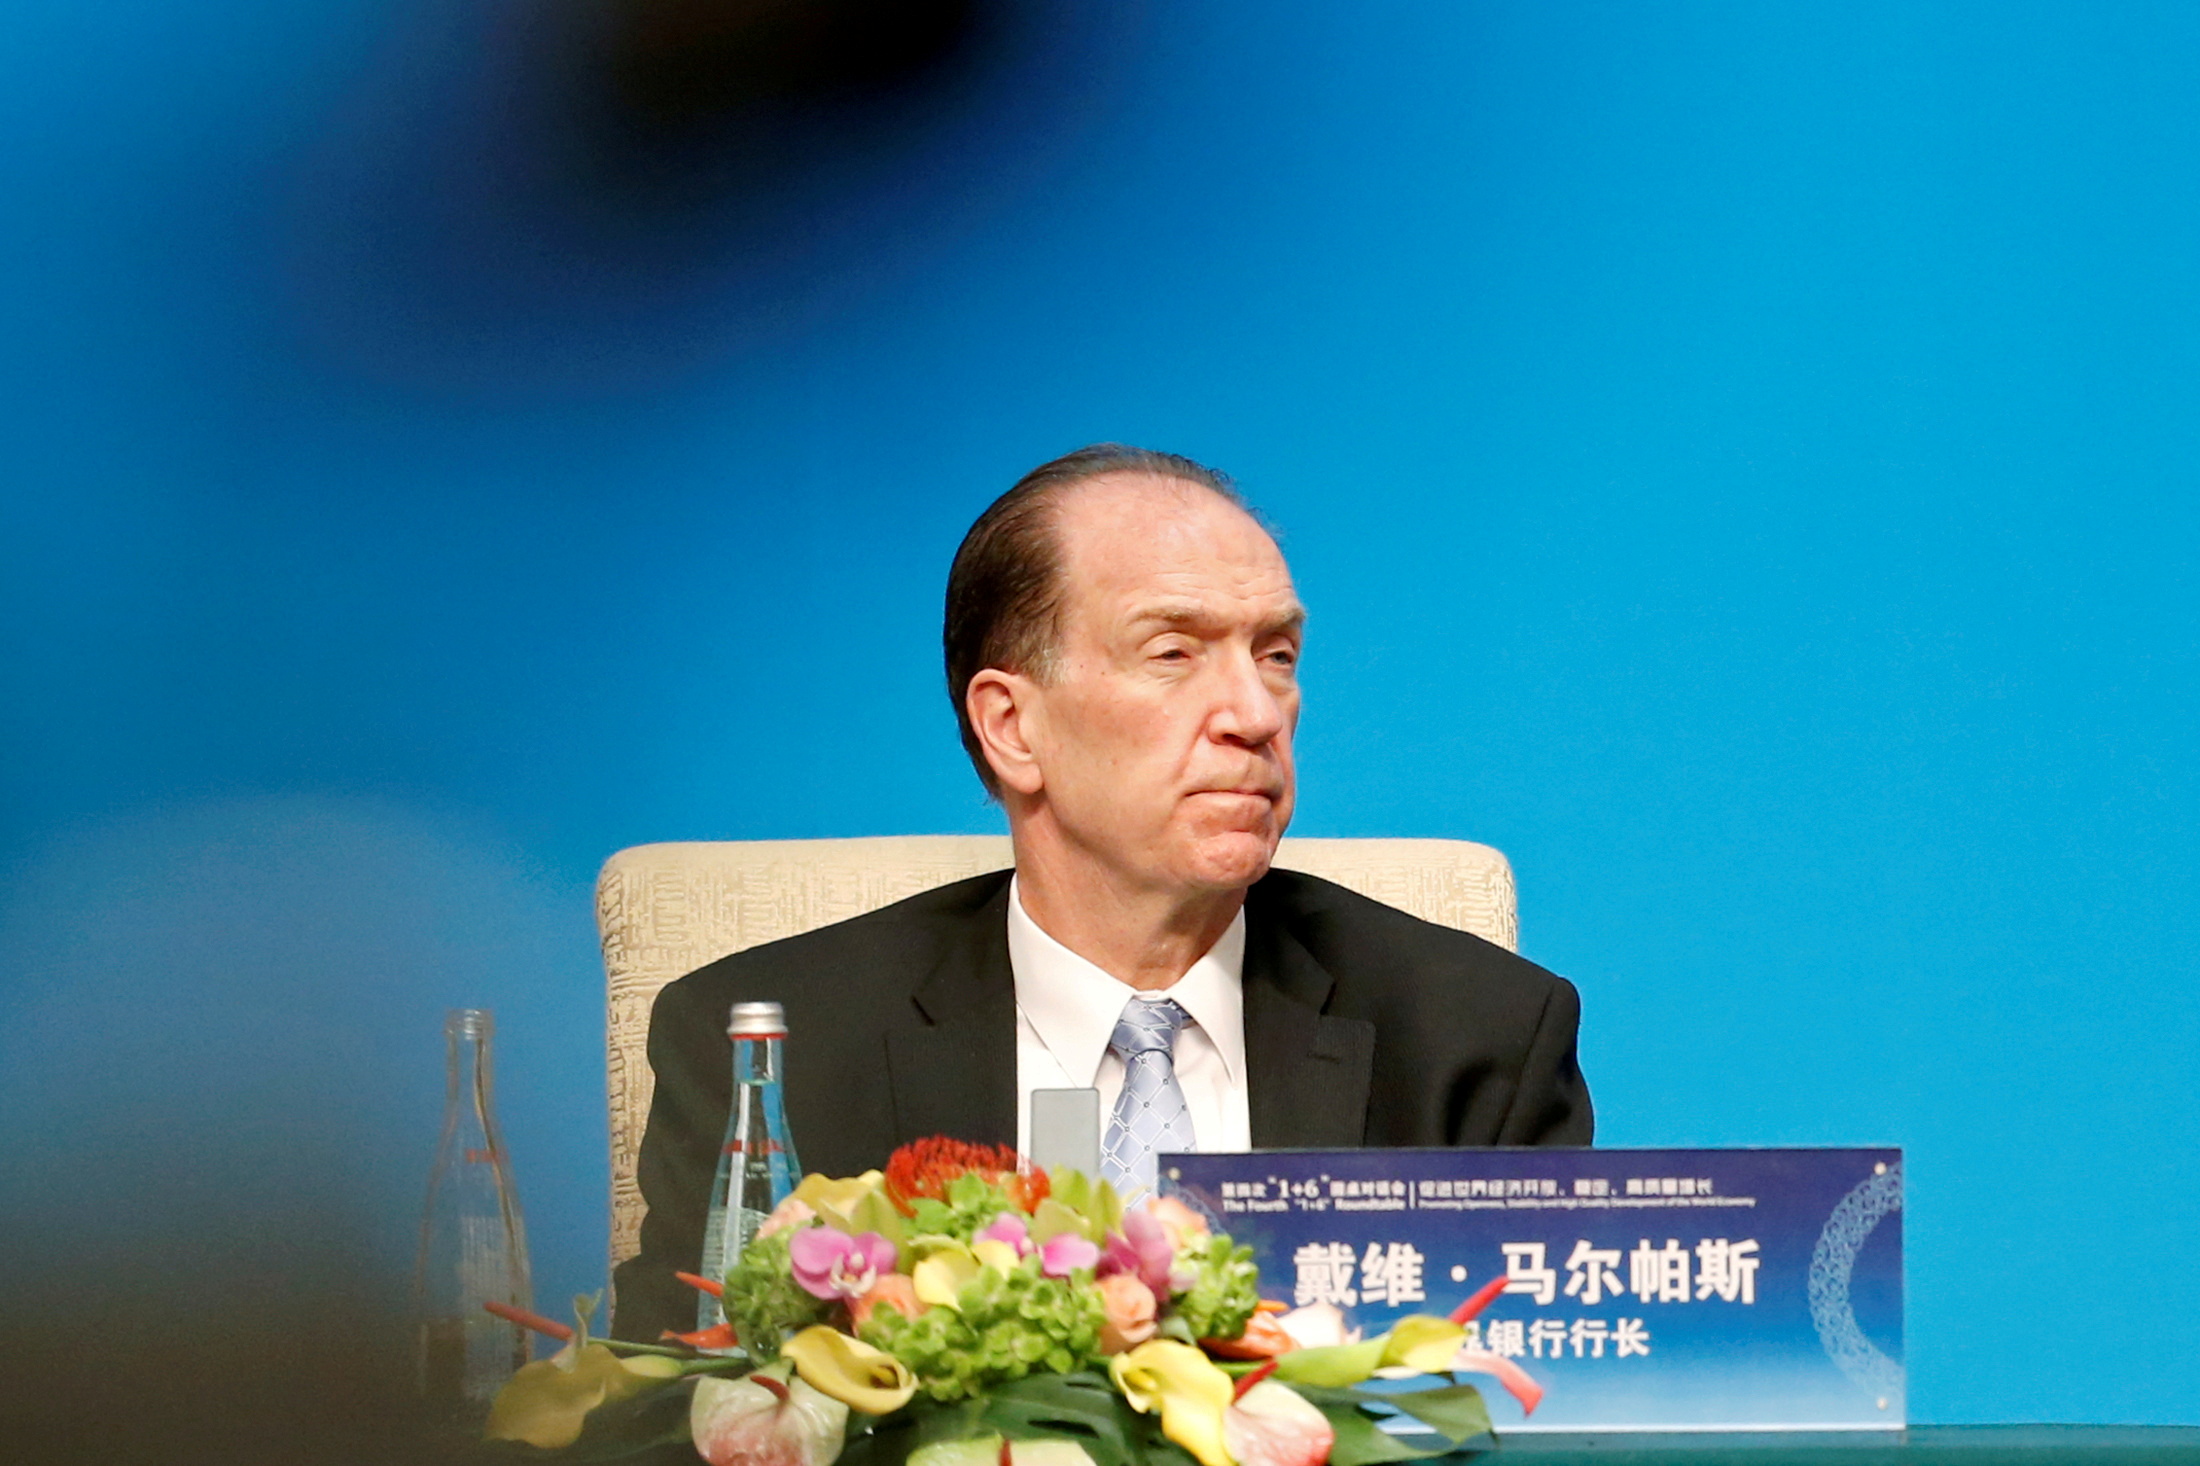 World Bank President David Malpass attends a news conference in China in 2019